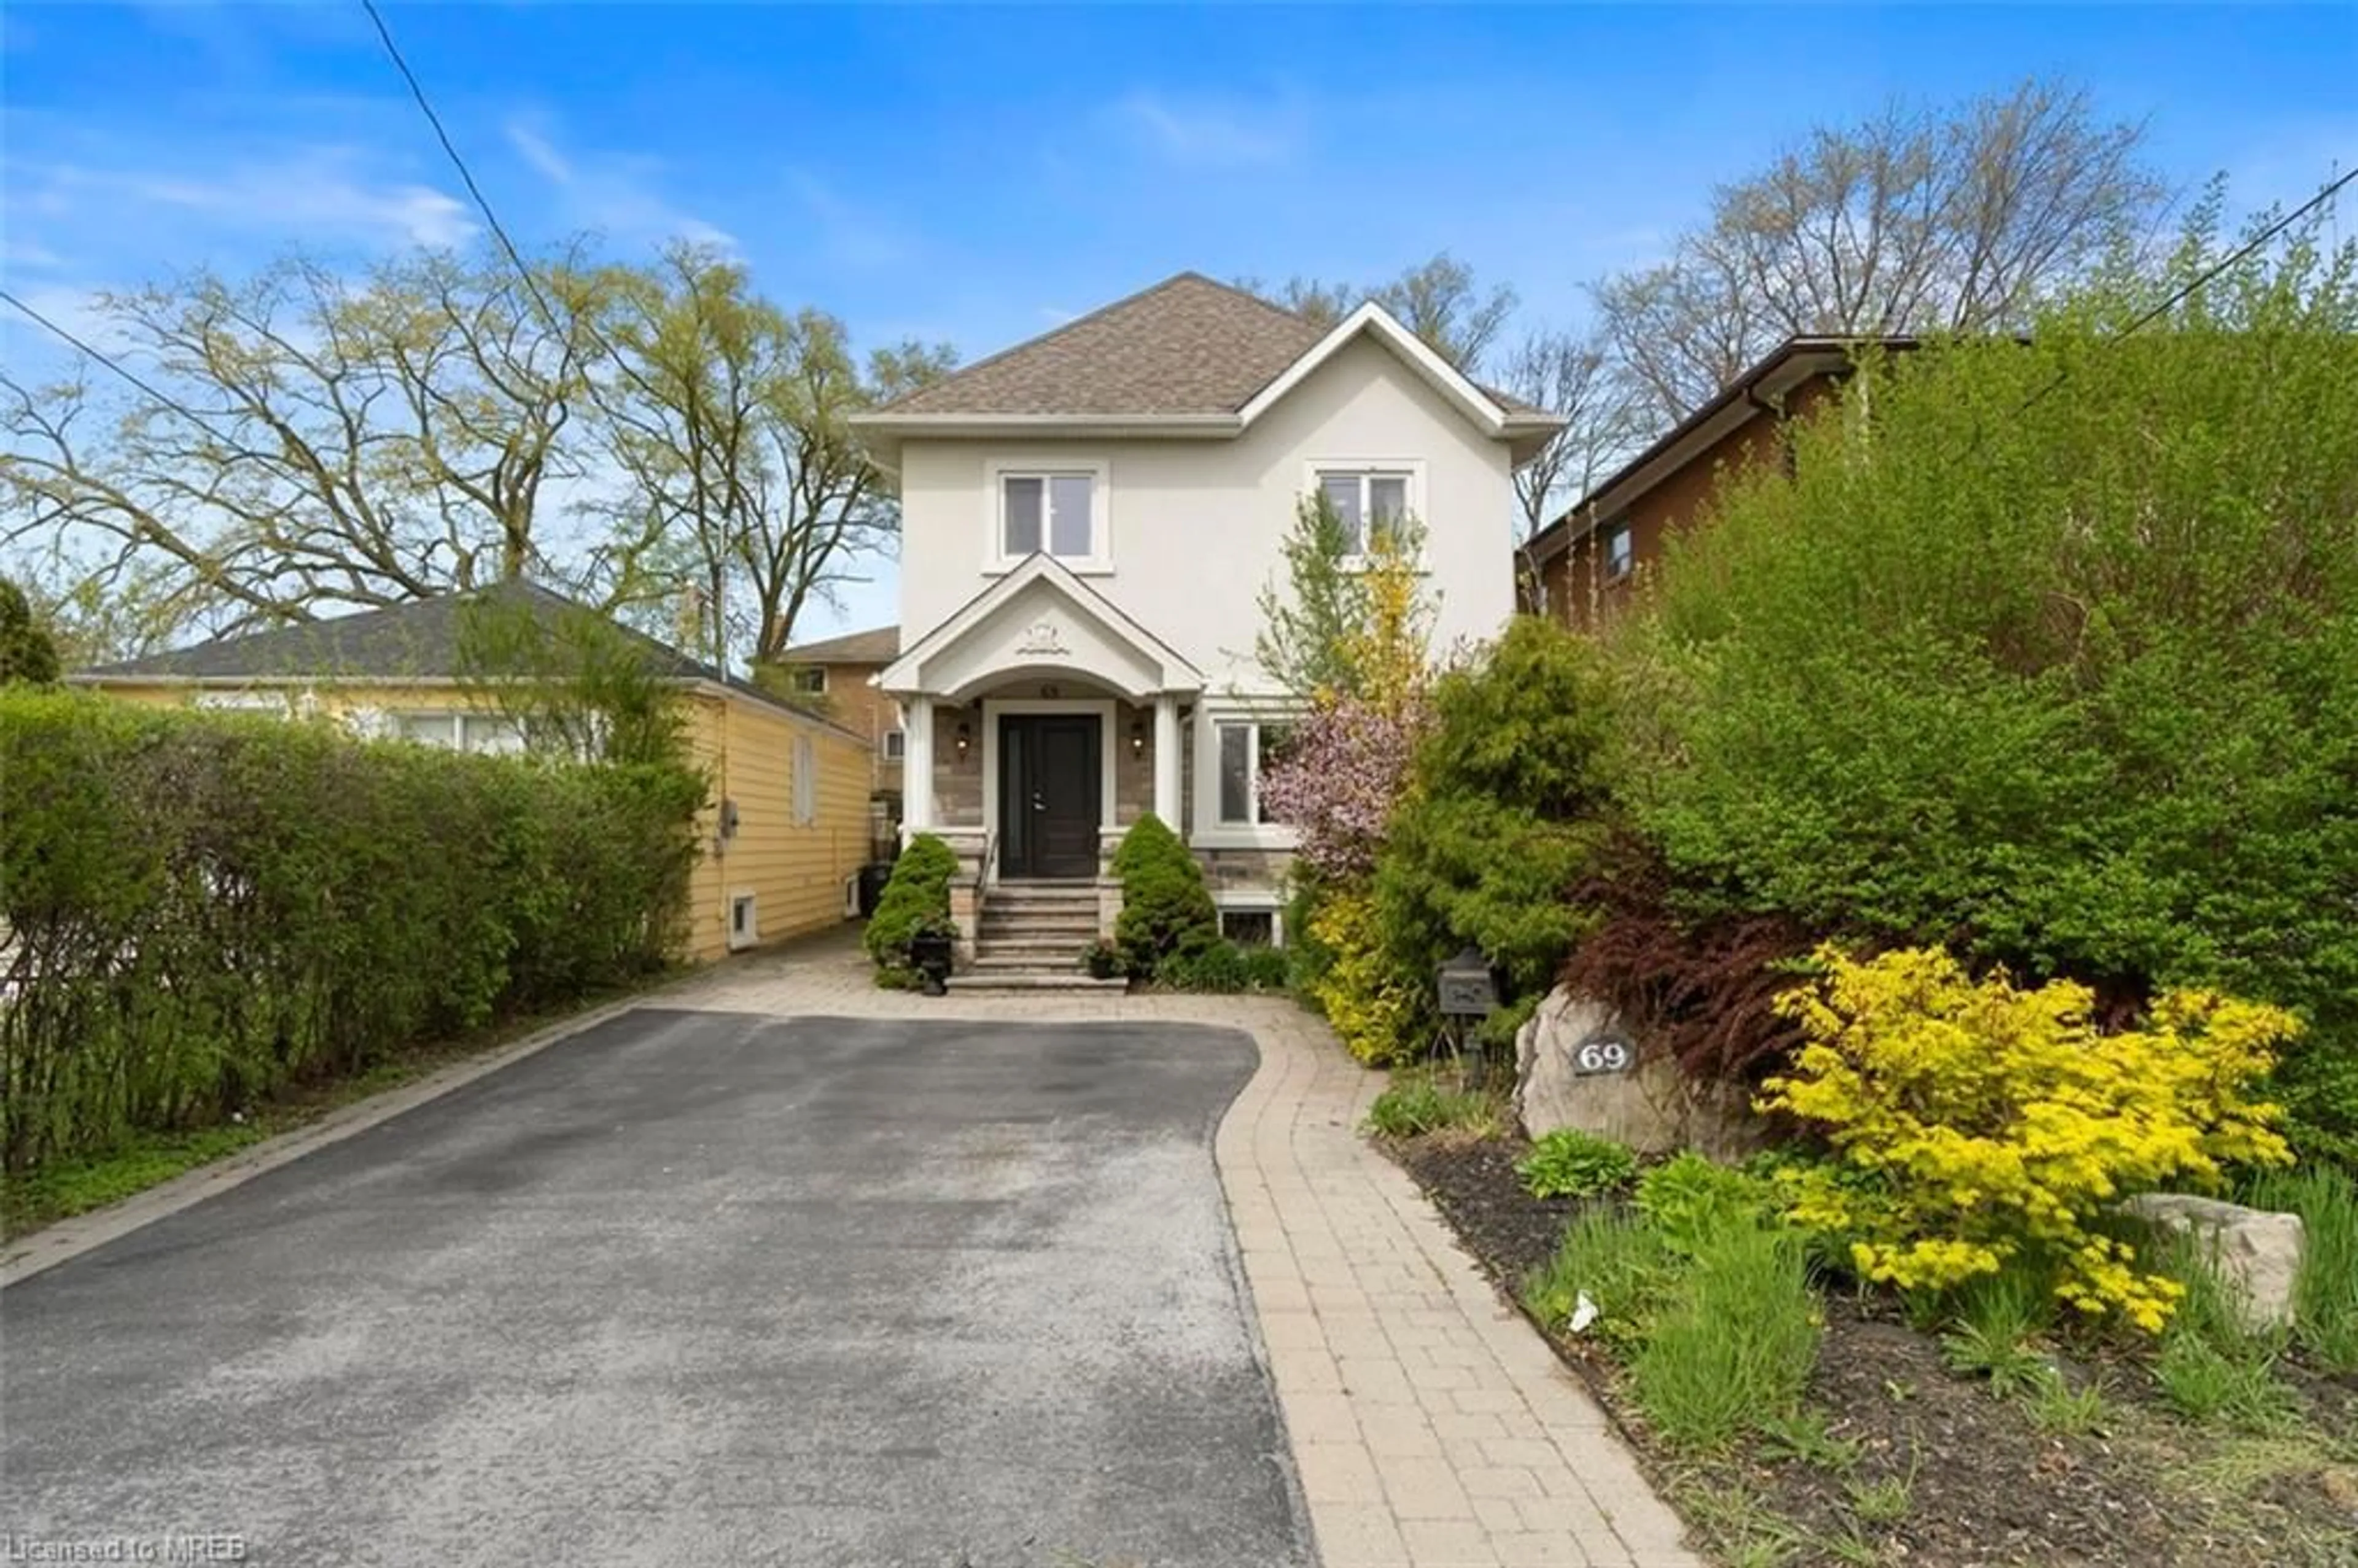 Frontside or backside of a home for 69 Mississauga Rd, Mississauga Ontario L5H 2H9